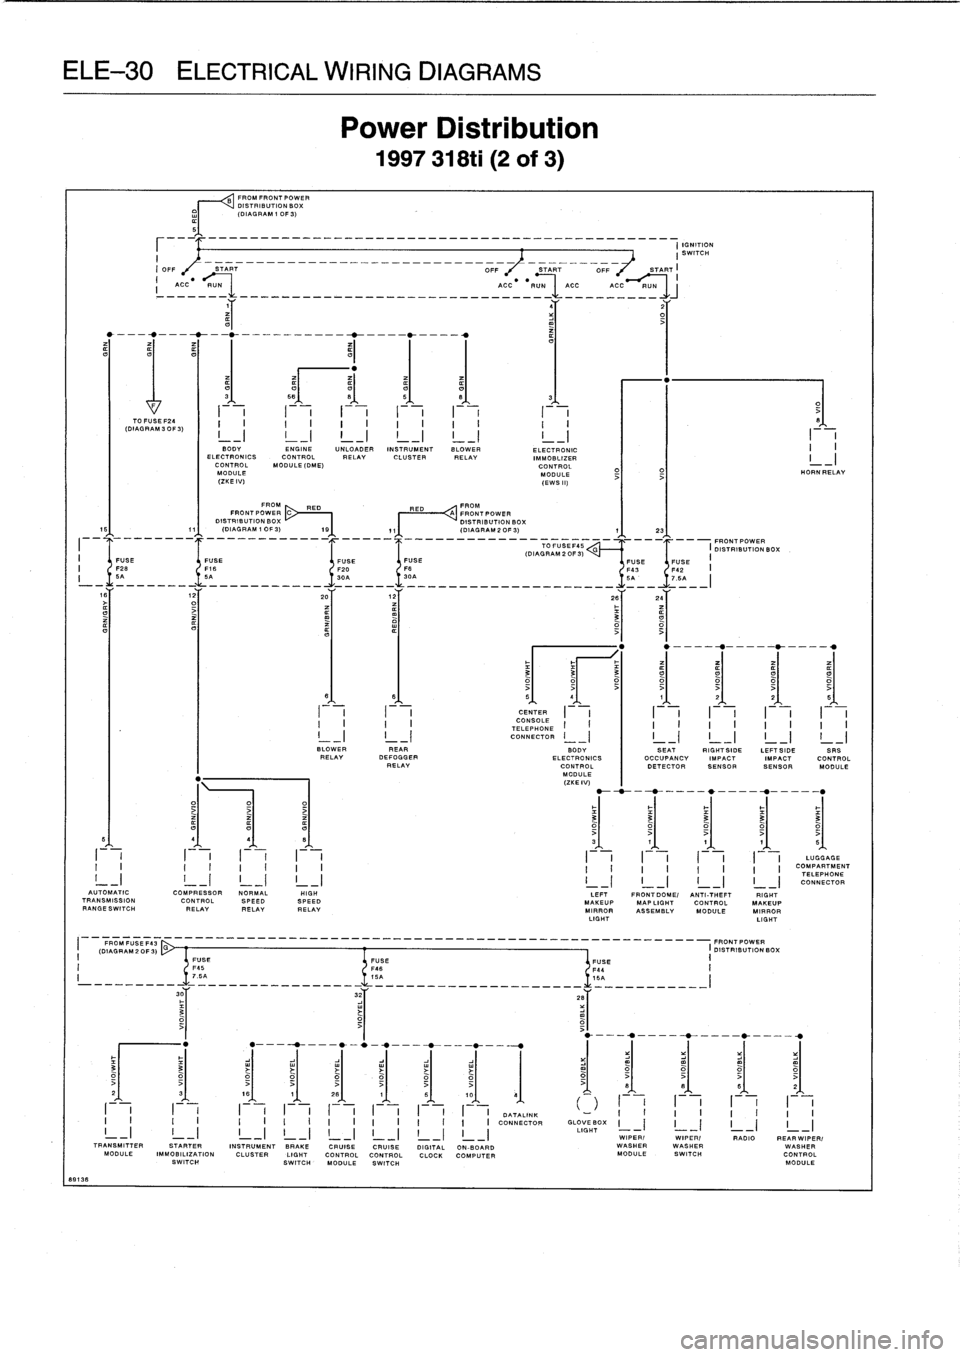 BMW 328i 1997 E36 Owners Manual 
ELE-30
ELECTRICAL
WIRING
DIAGRAMS

I
ACC
-R=_
____-____-______________
ACC
-
RUN

	

ACC
-_-C~

4Y

	

2Y

I

	

I

TO
FUSE
F24
(DIAGRAM
30F
3)

FROM
FRONT
POWER
DISTRIBUTION
BOX
(DIAGRAM
1
0F3)
IGNI